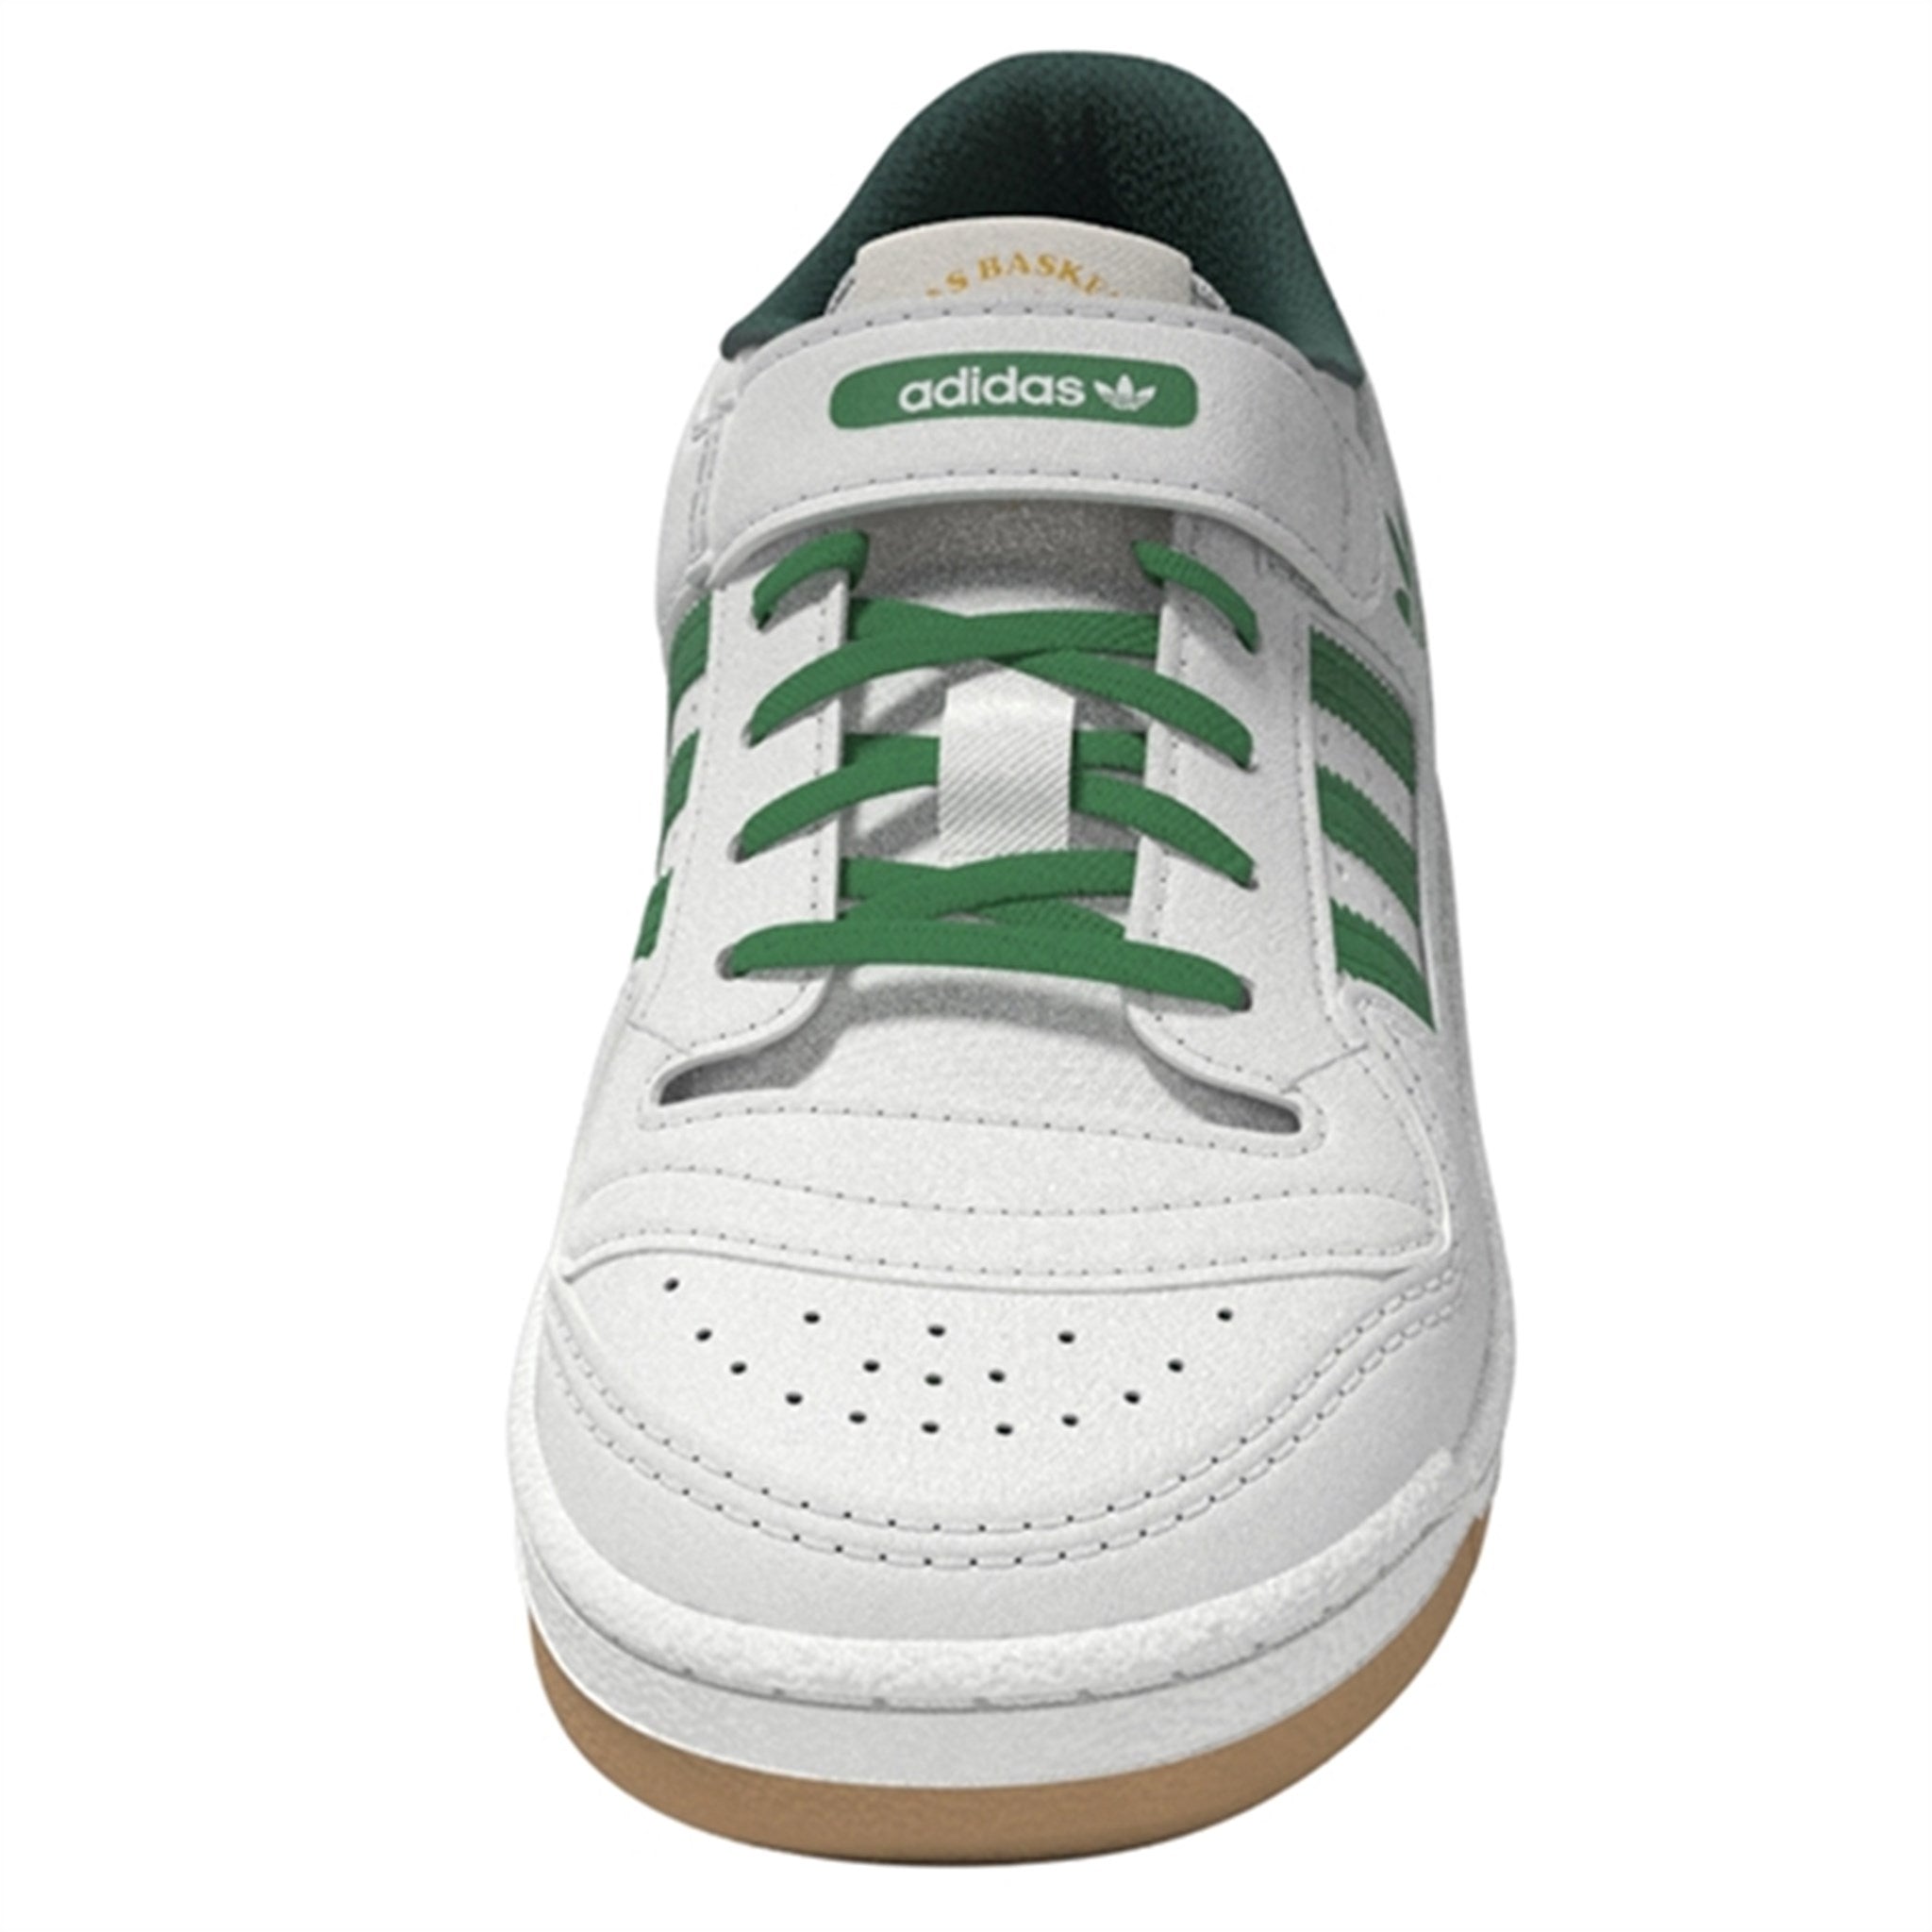 adidas Basketball Forum Low C Sneakers White / Green 5